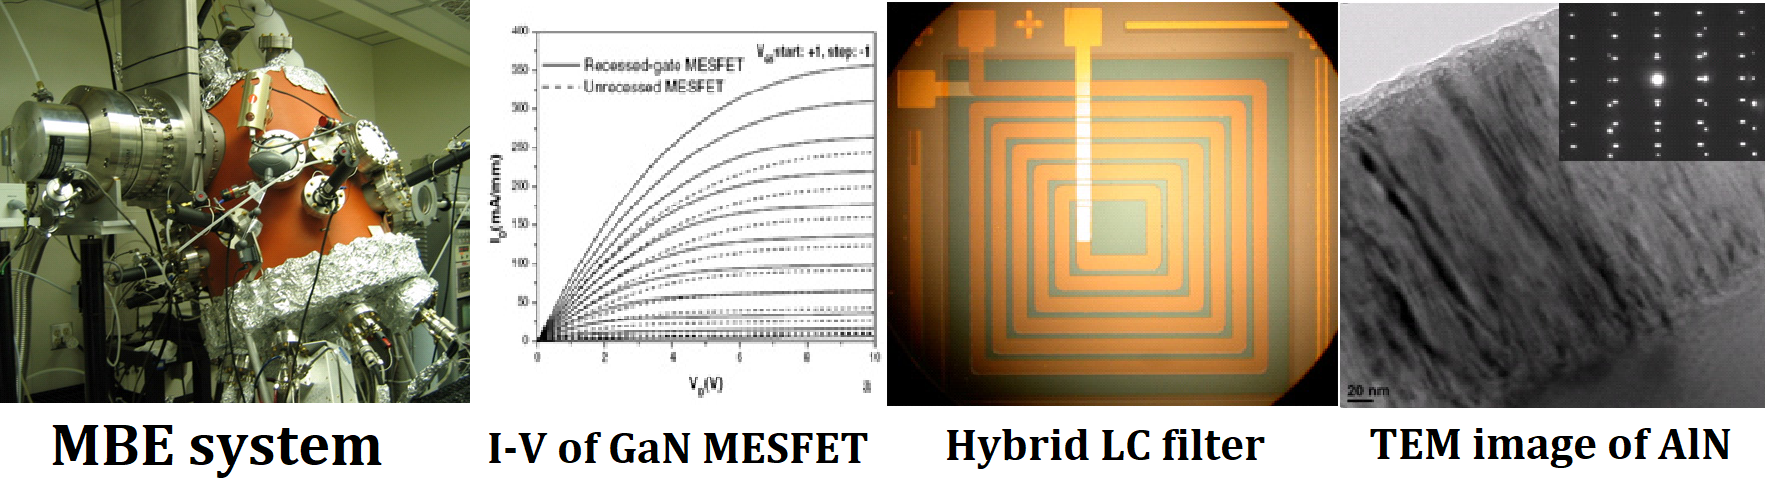 From left to right "MBE system, I-V of GaN MESFET, Hybrid LC filter, TEM image of AlN"